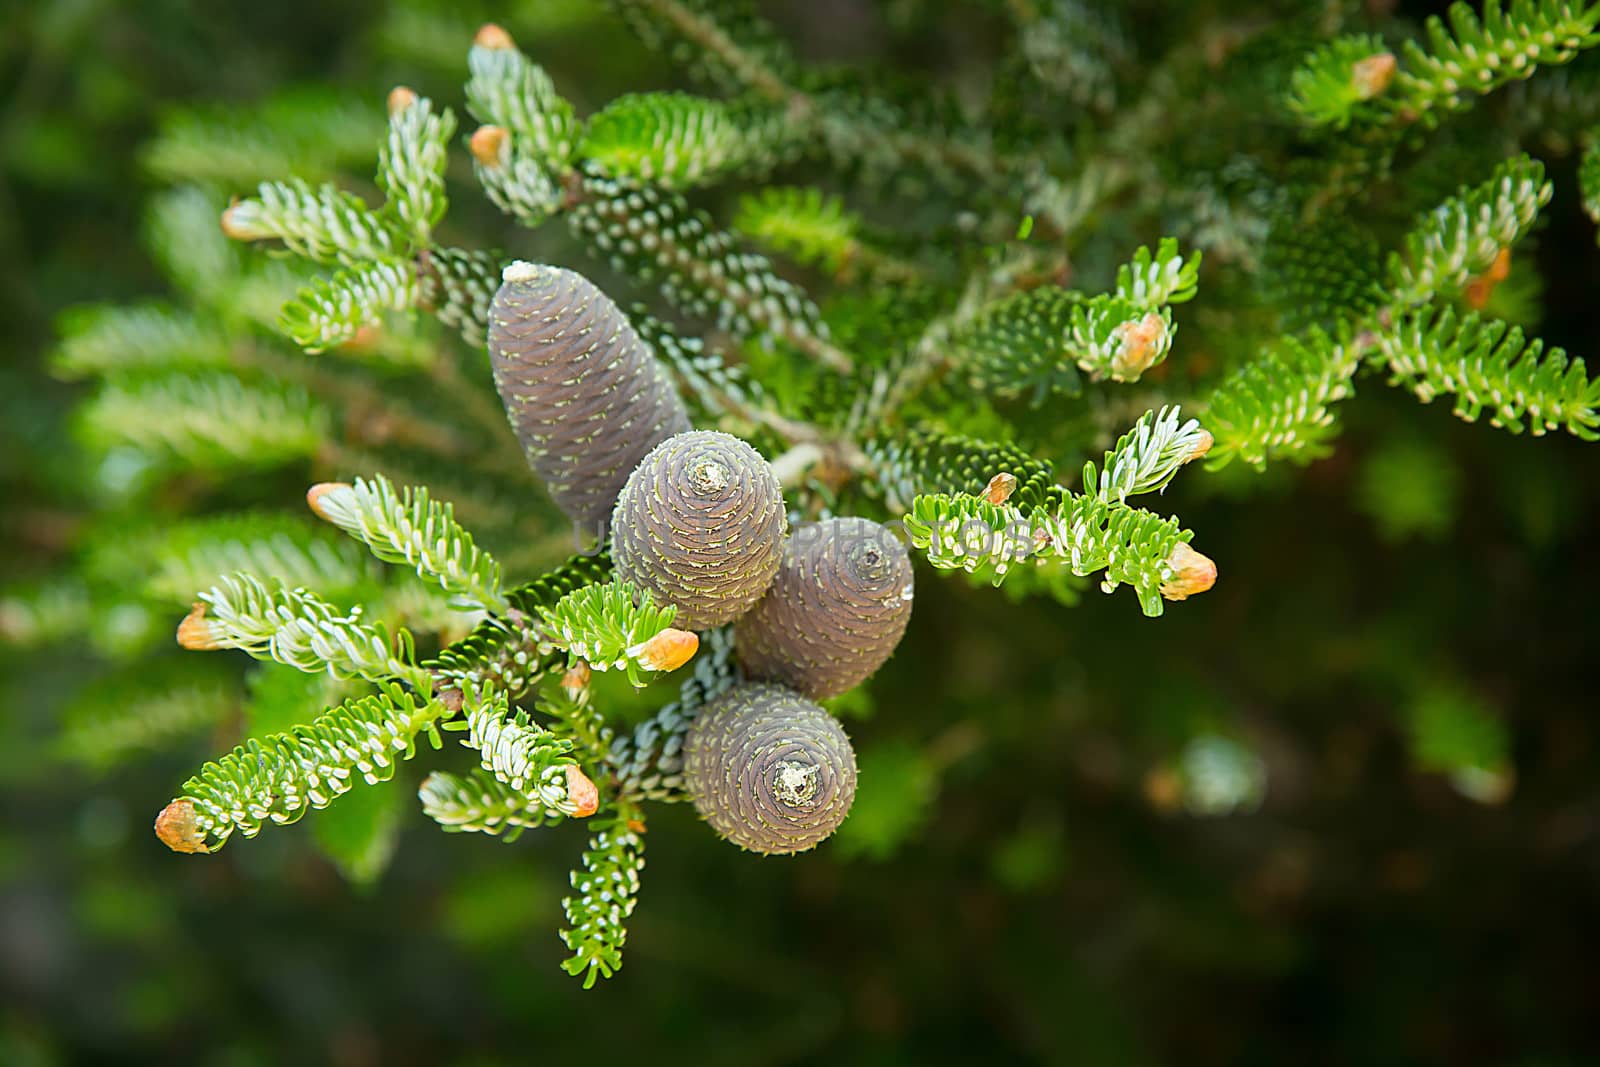 Korean fir with green cones on a branch in the garden.Texture or background